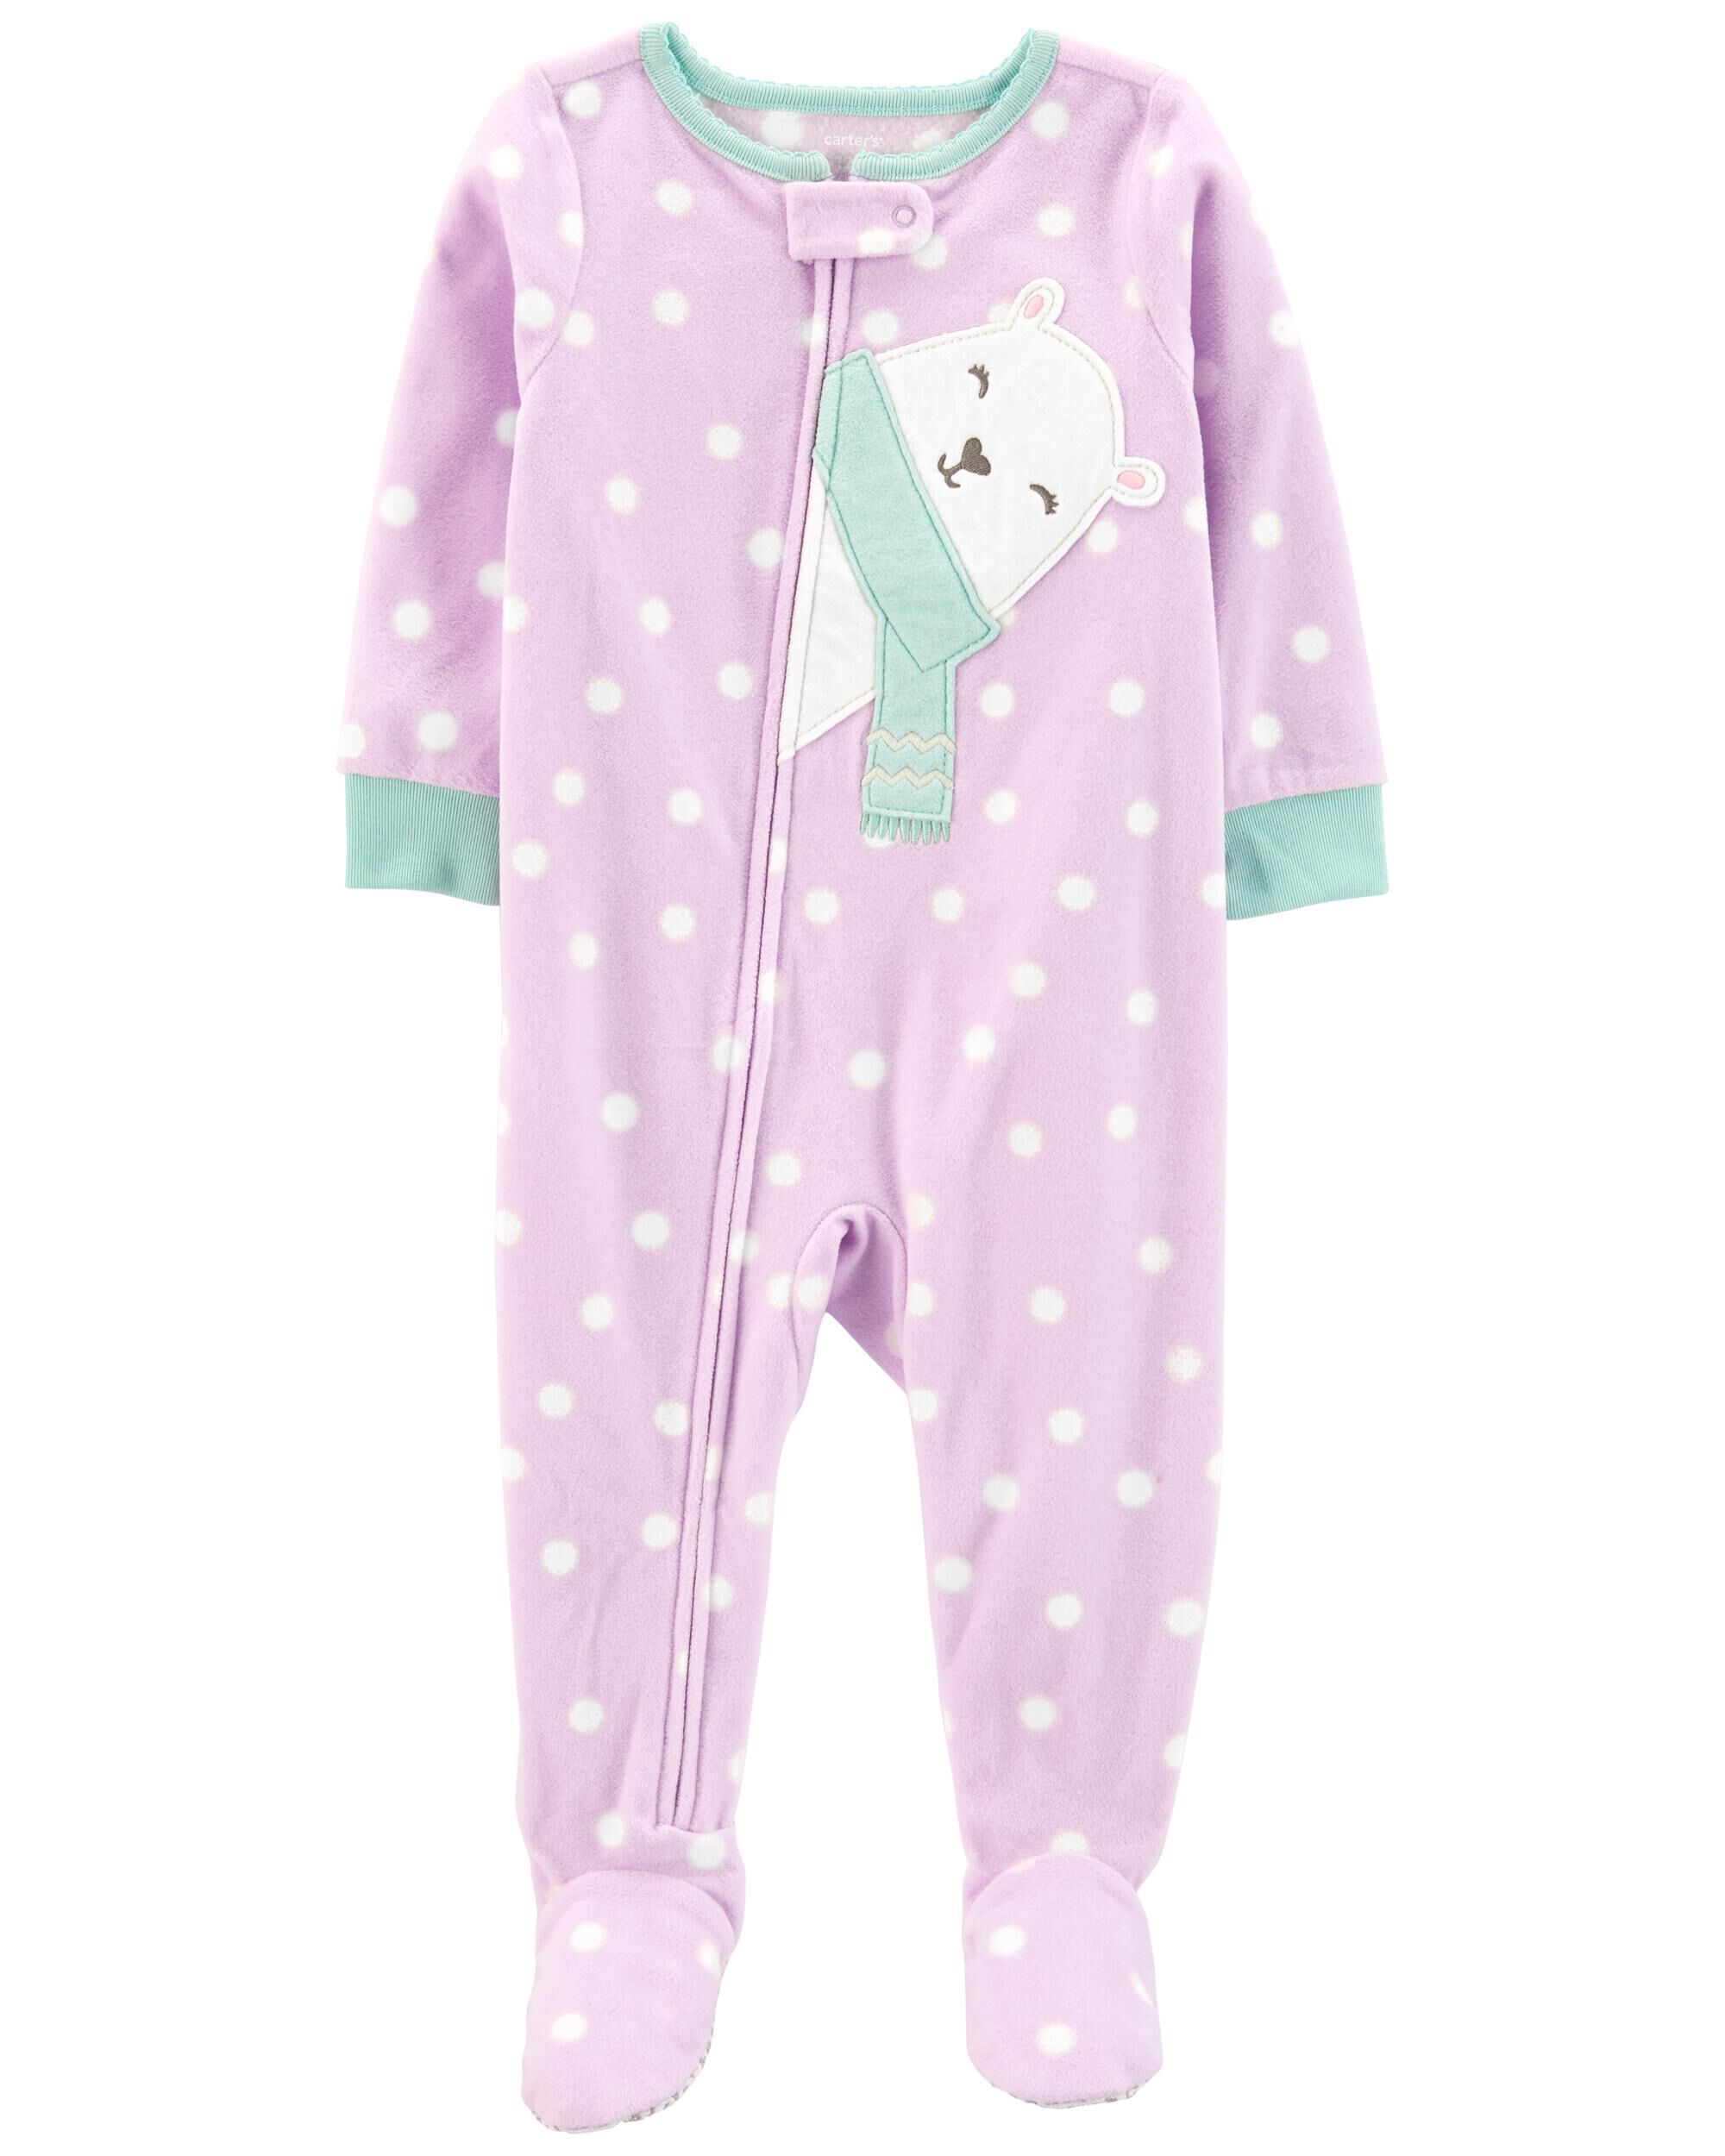 Just One You Carters Girls 9M NEW “Little Sister” One Piece Footed Pajamas L6 